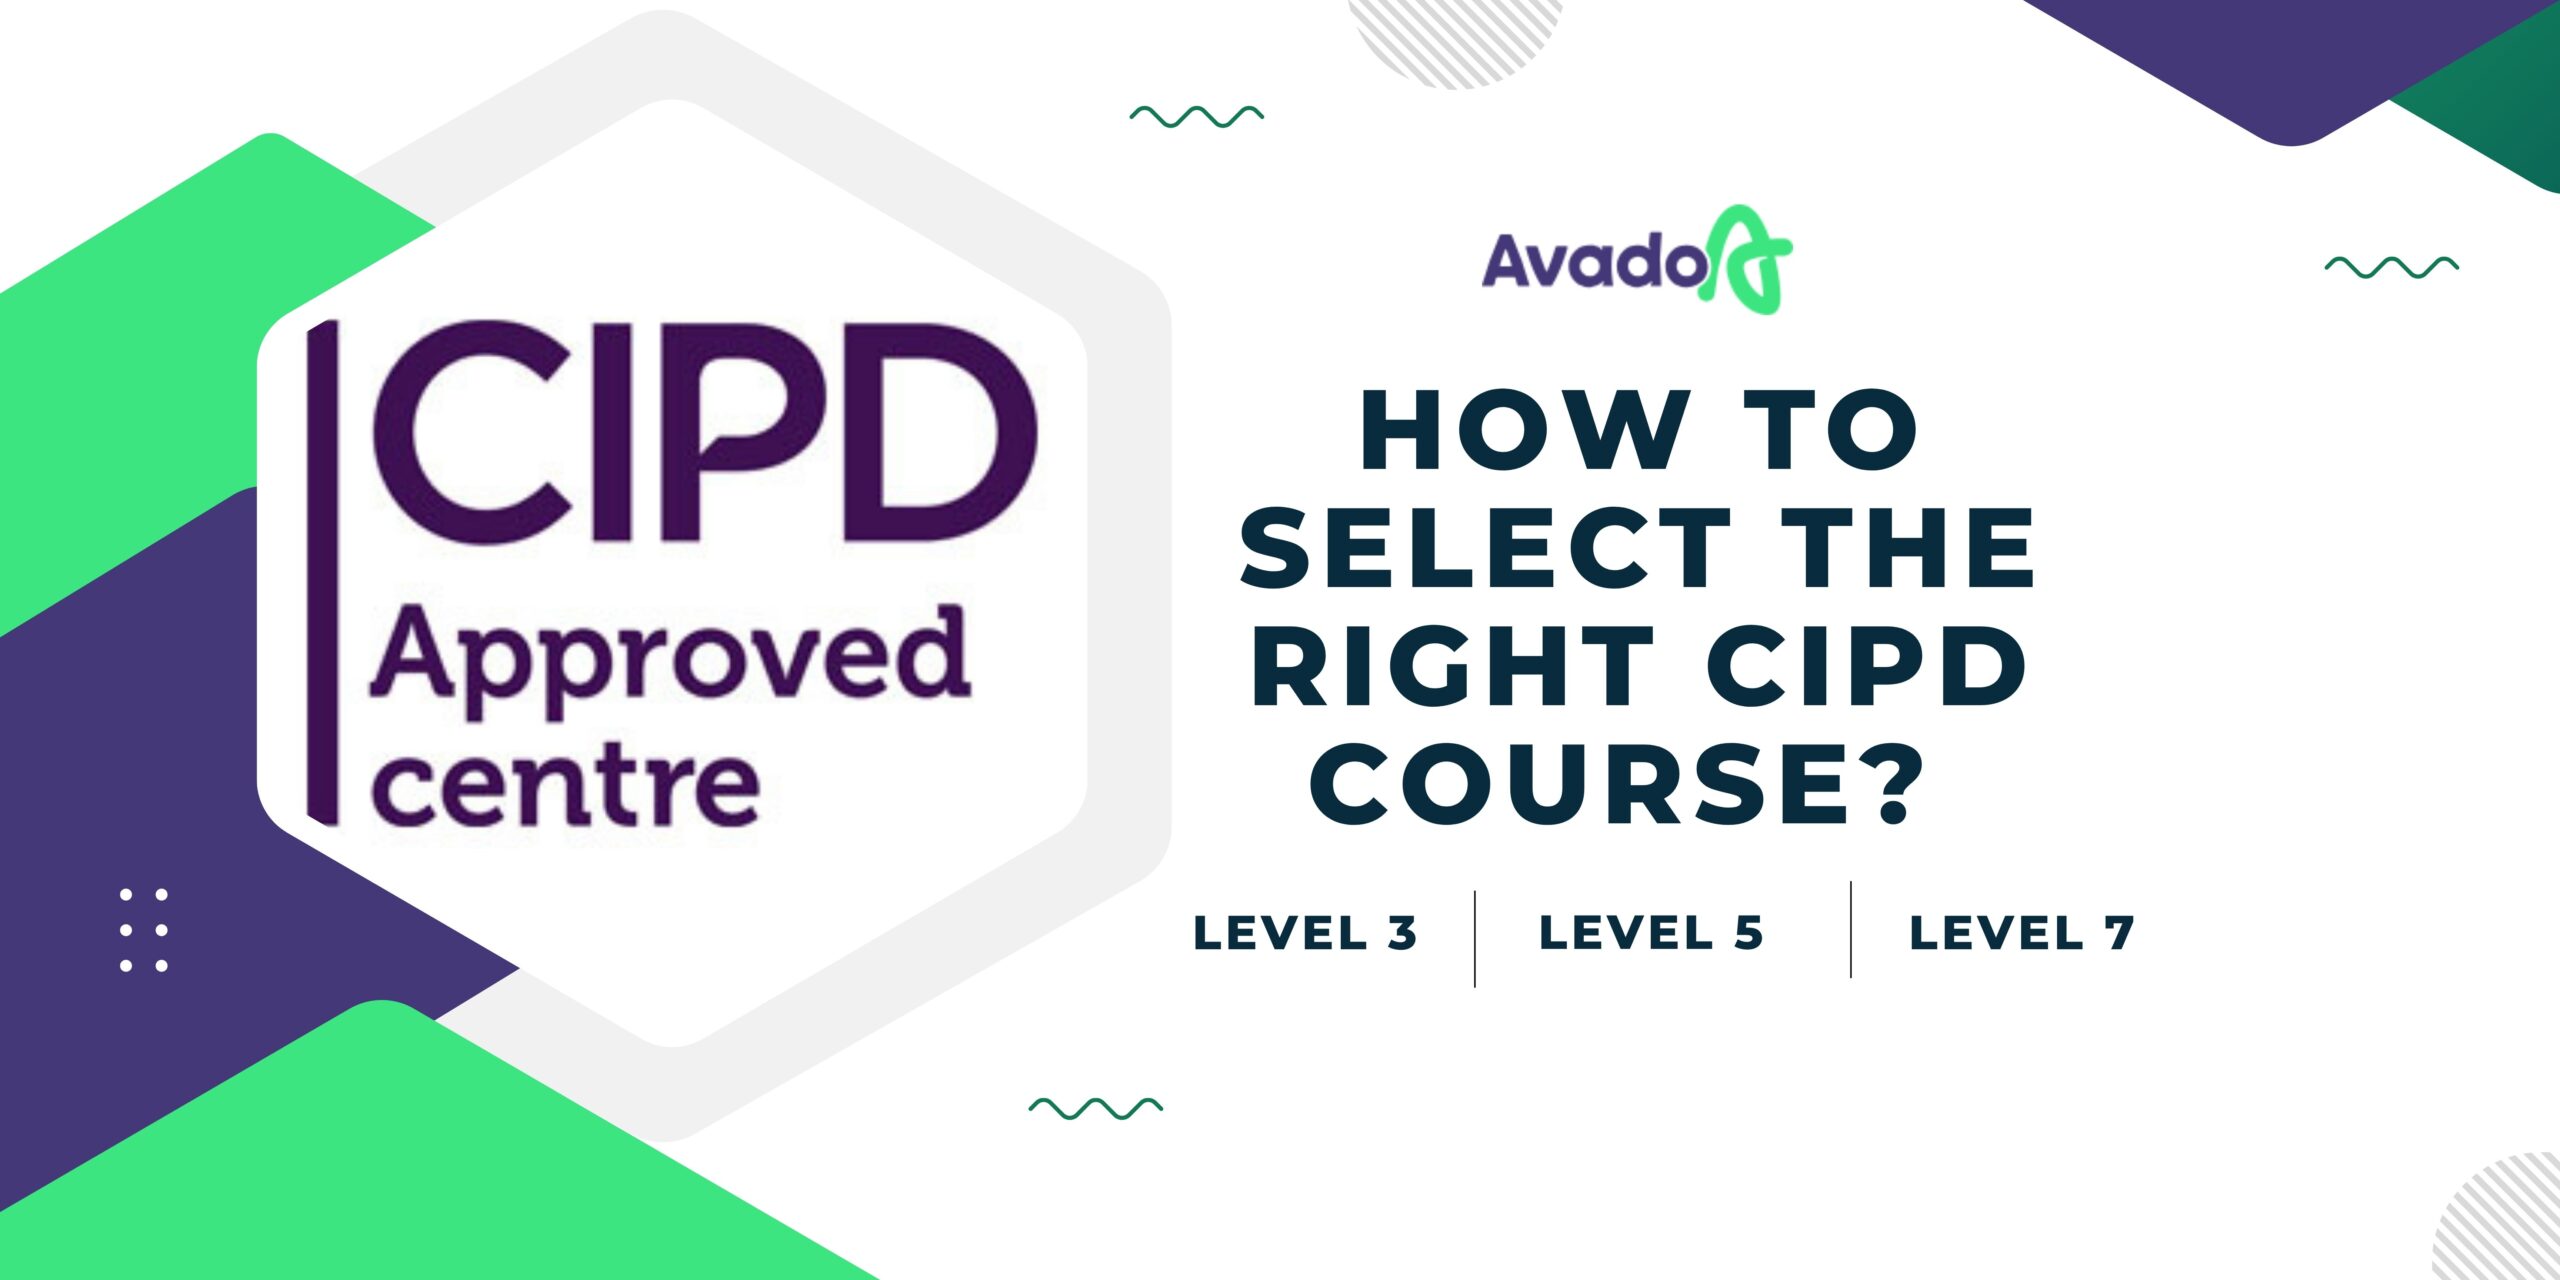 How to select the right CIPD course